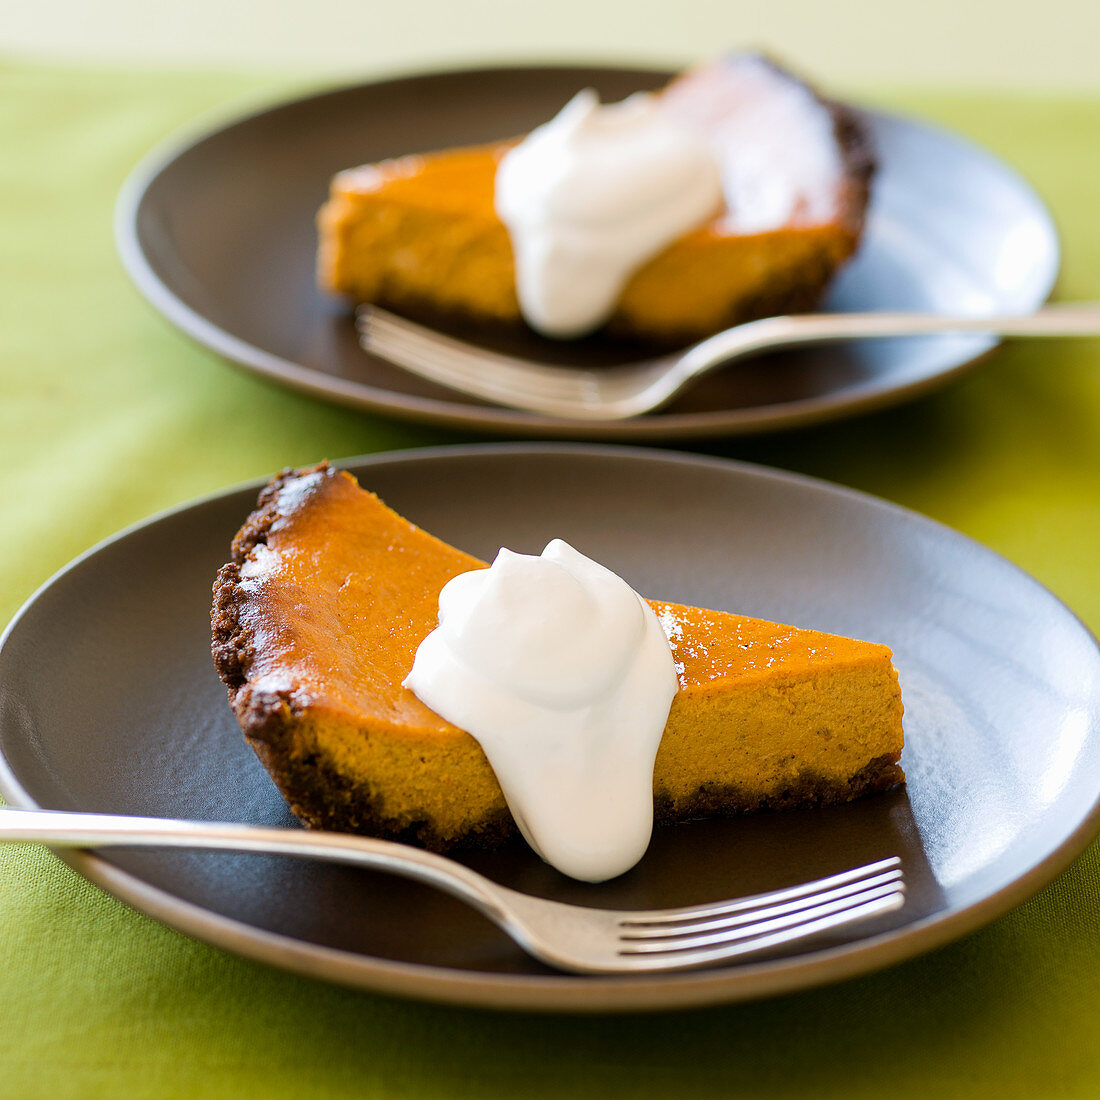 Two slices of pumpkin pie with whipped cream